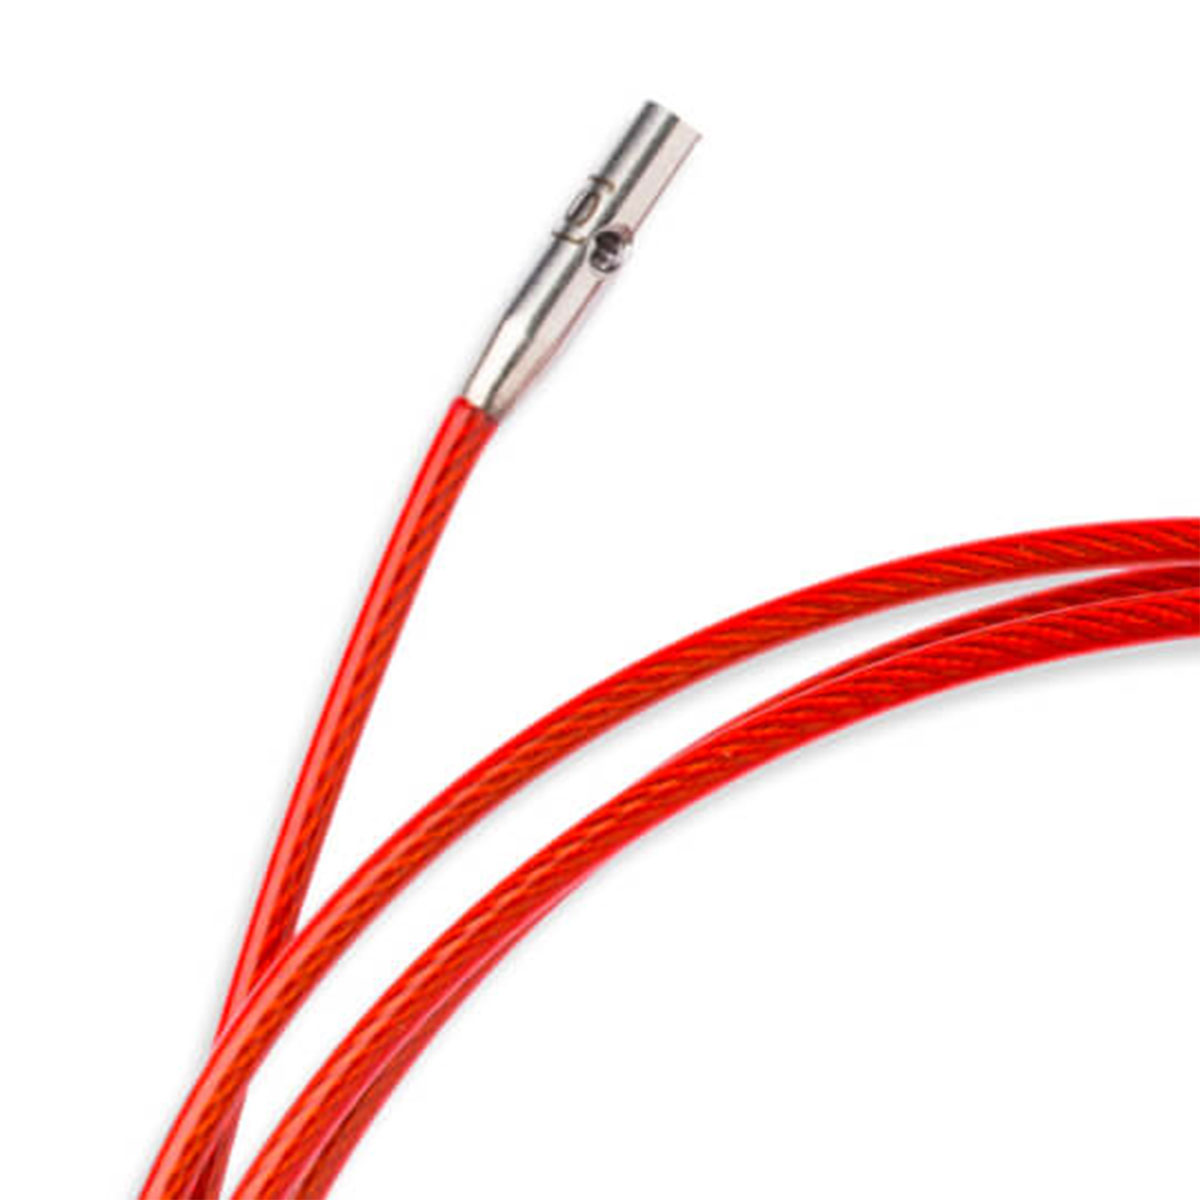  ChiaoGoo 7522-S Twist Lace Interchangeable Cables, 22-Inch  ,Small, Red